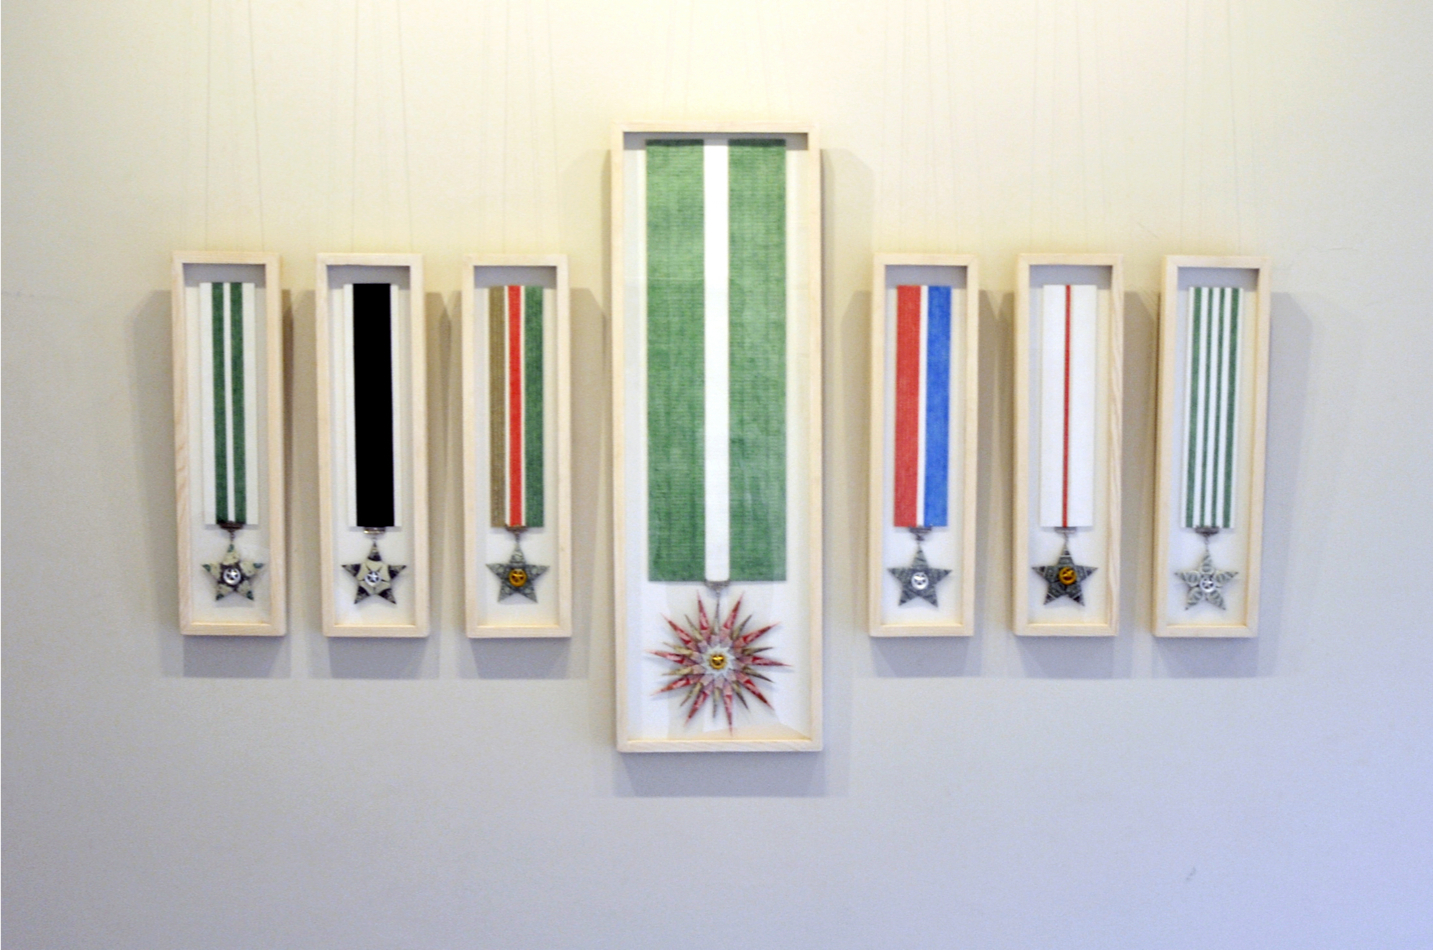   Decorations ,&nbsp;2012, Installation view,&nbsp;Charcoal, chalk pastel, coloured pencil and typed on Canson paper, metal and folded one US$ and Pakistani Rs. banknotes, Dimensions variable 